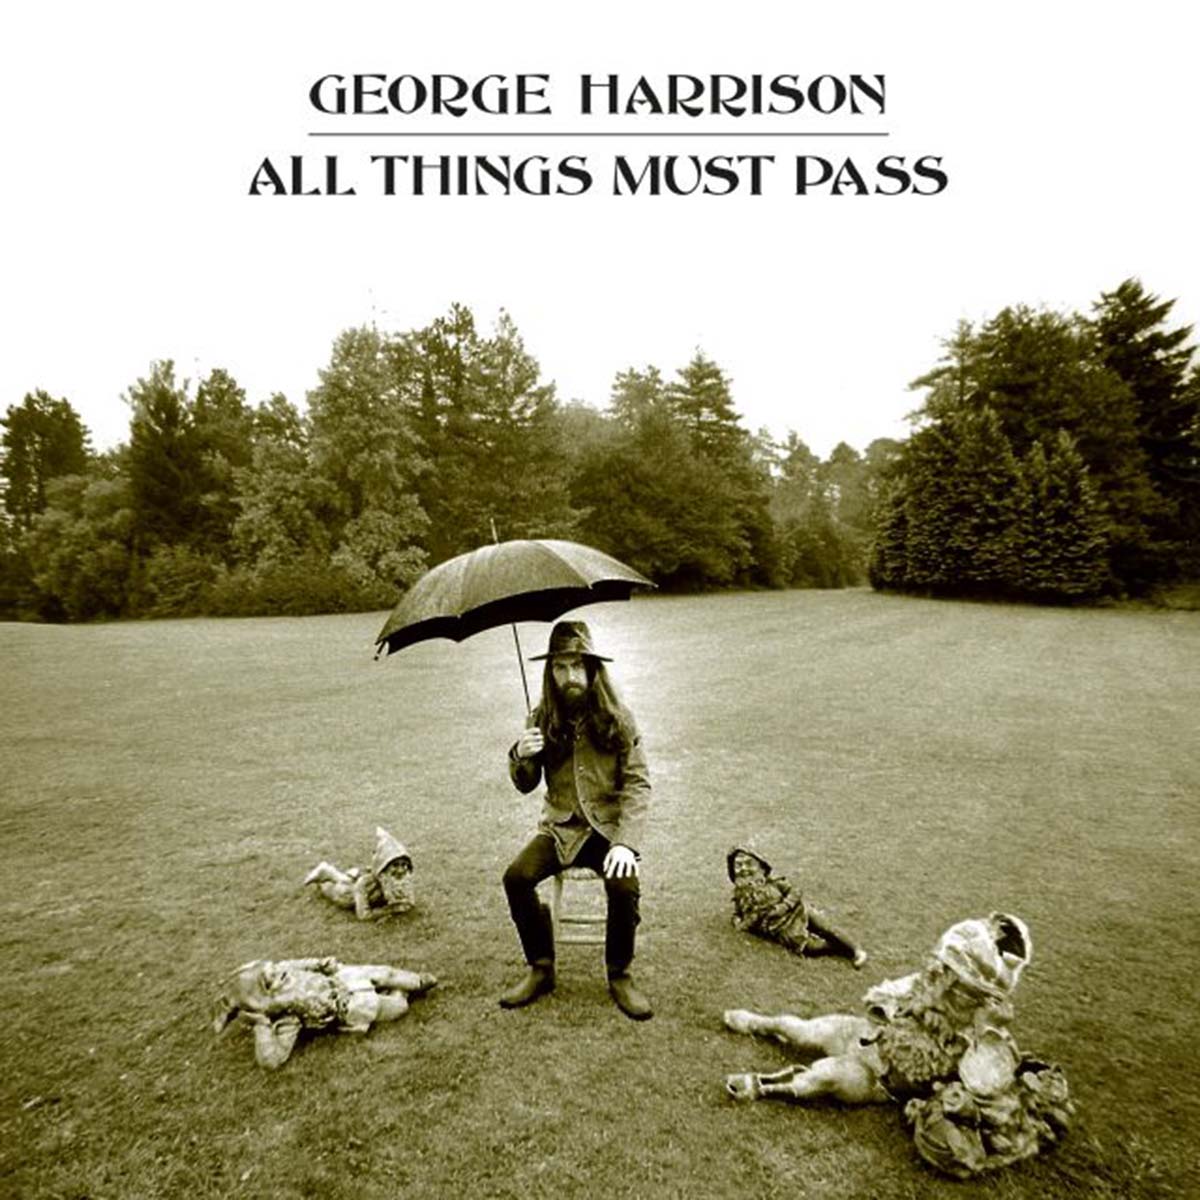 George Harrison’s All Things Must Pass Celebrates 50th Anniversary